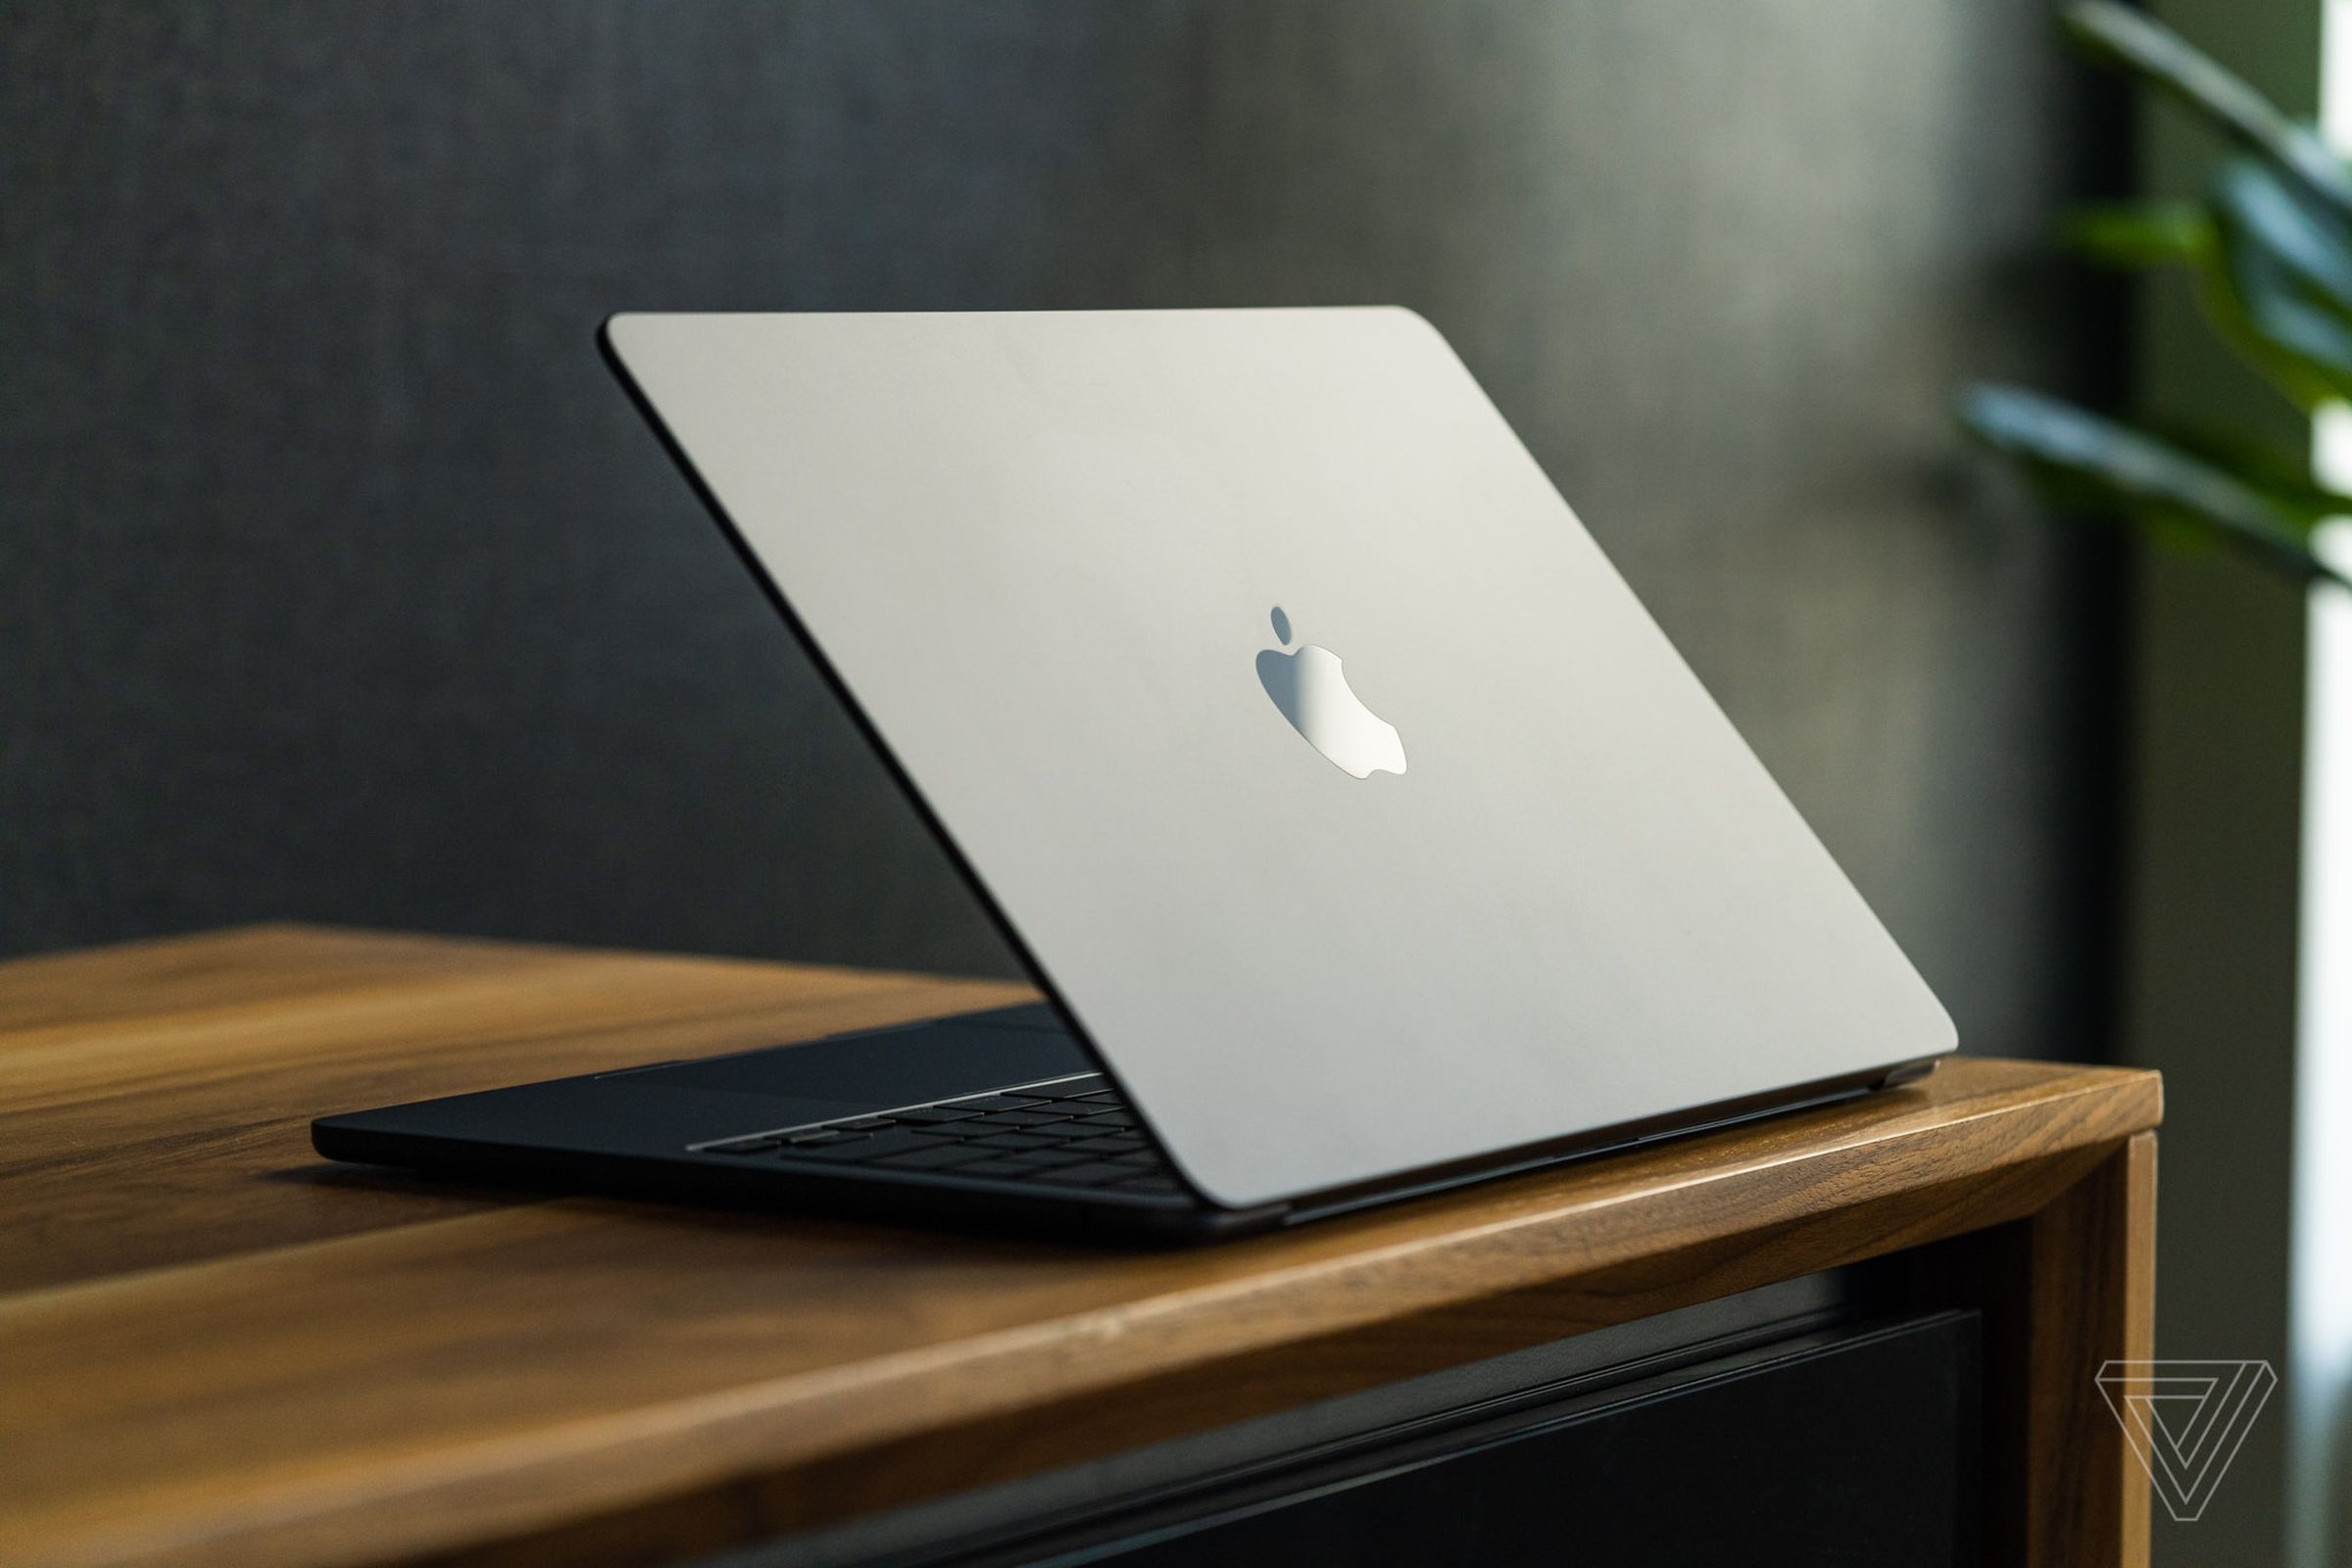 Despite the thinner and lighter design, the new Air is just as well-built as other Apple laptops.